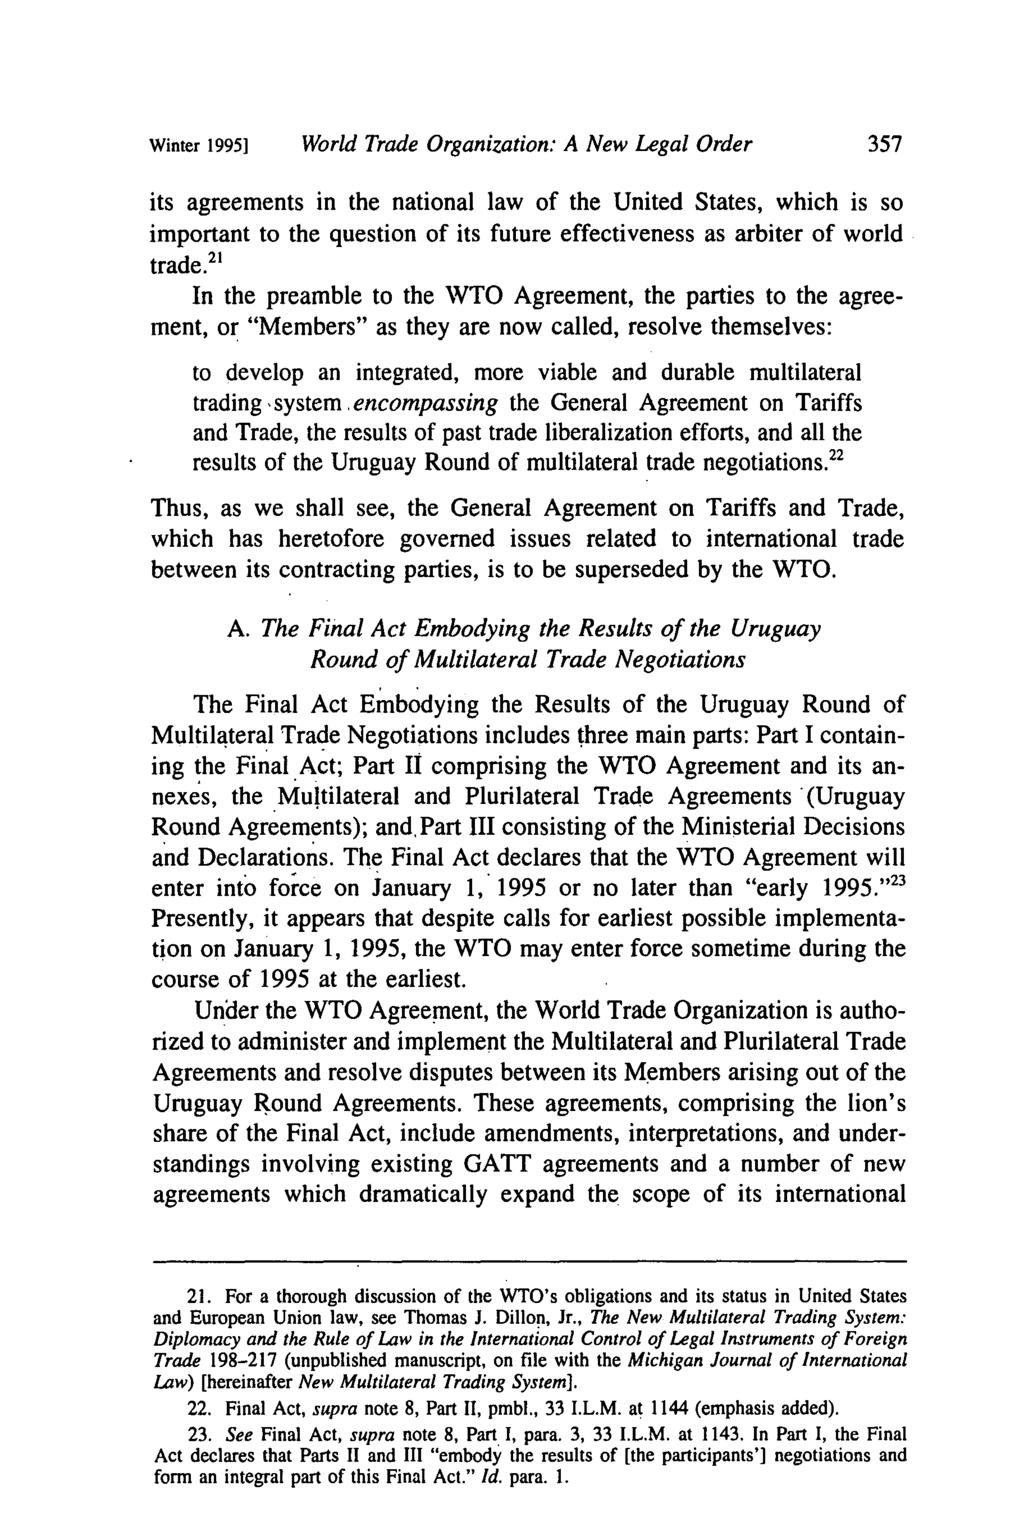 Winter 1995] World Trade Organization: A New Legal Order its agreements in the national law of the United States, which is so important to the question of its future effectiveness as arbiter of world